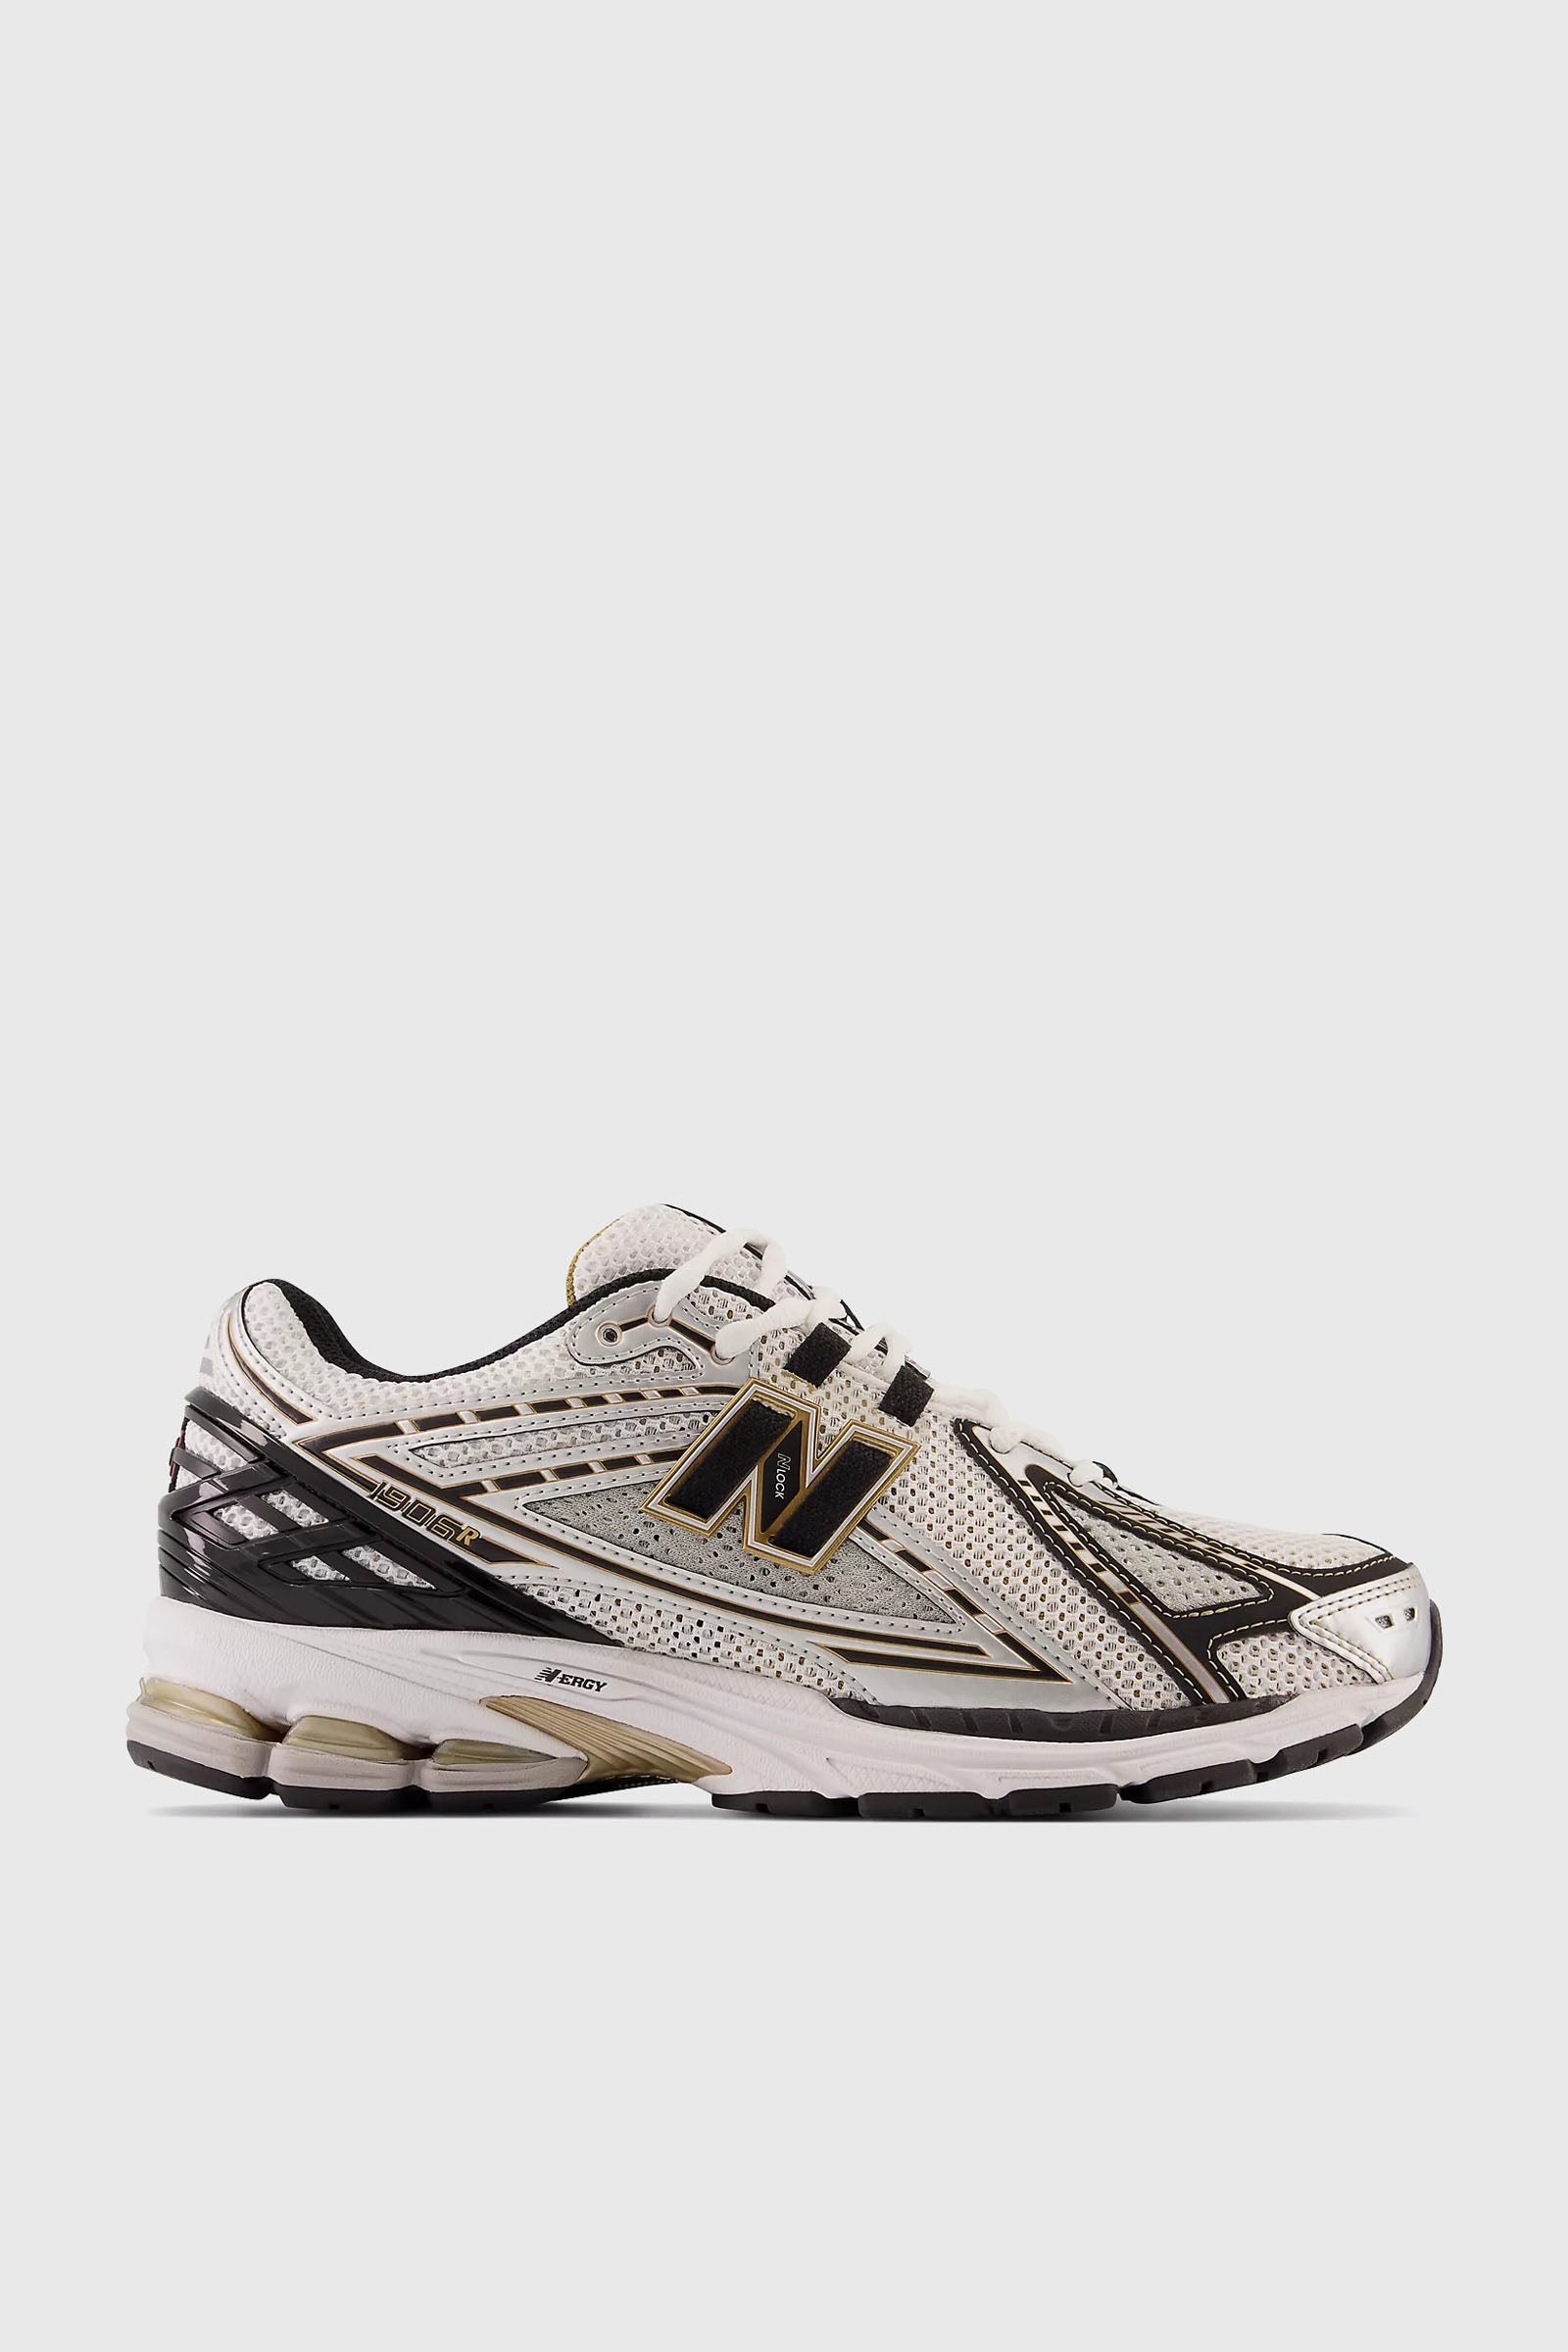 H1 Title: New Balance White/Gold Synthetic Running Shoes 1906R - 1